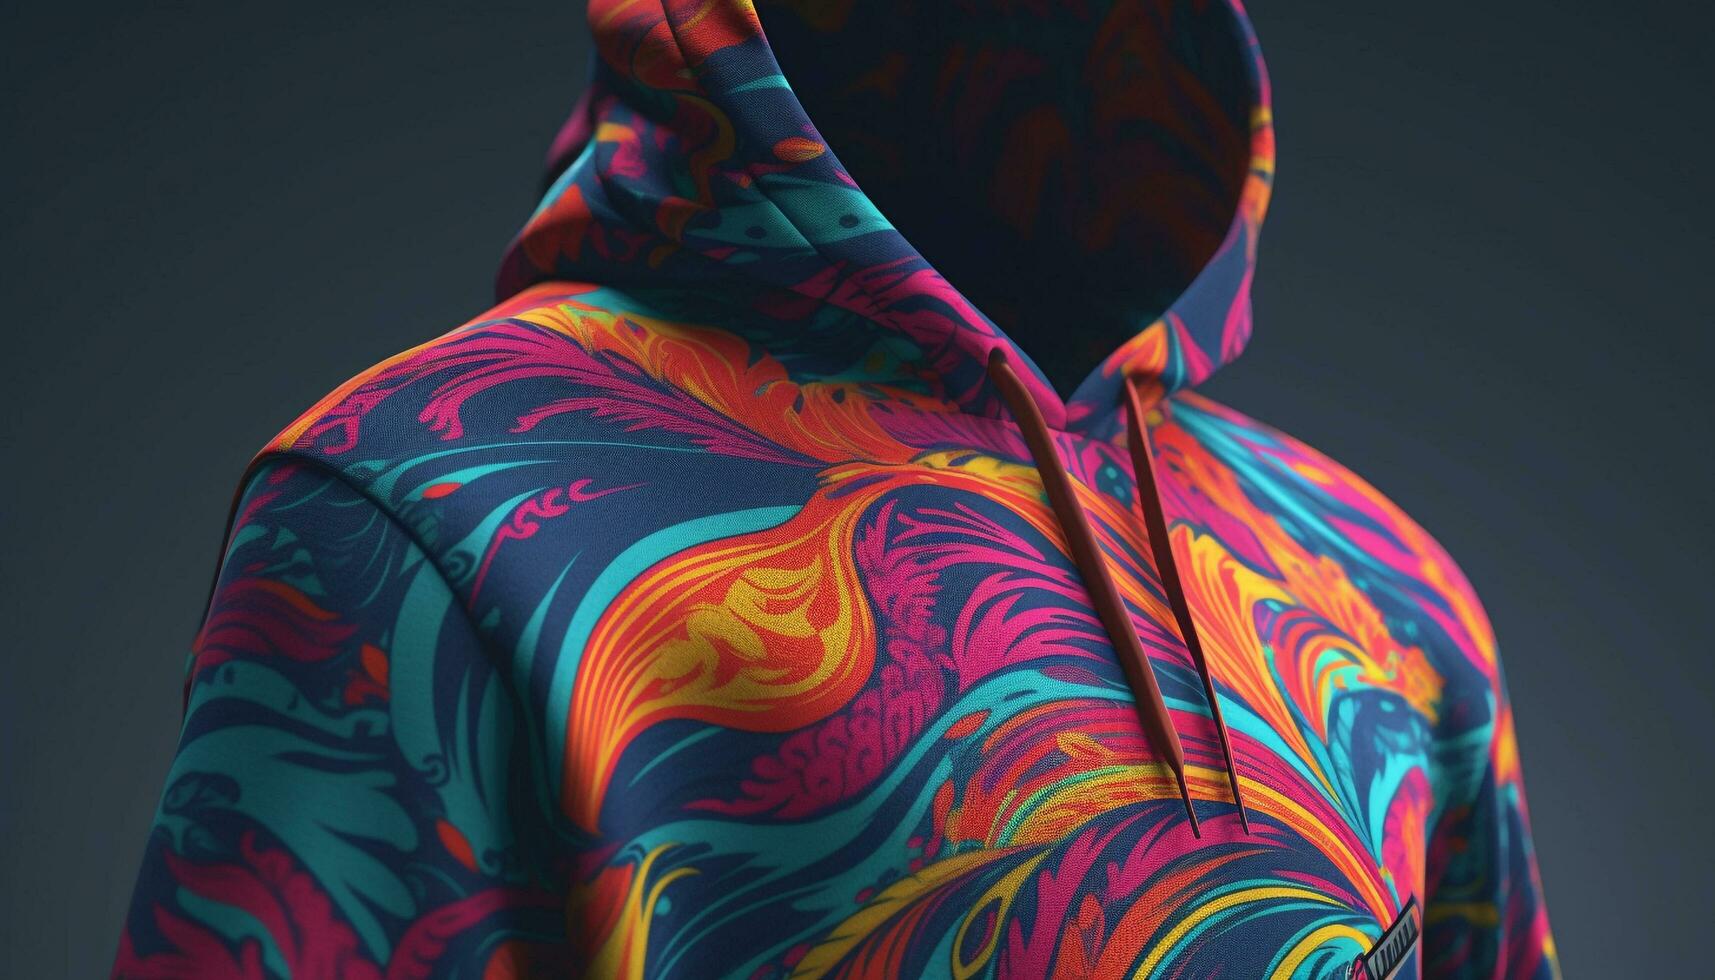 Multi colored hooded shirt design on young adult generated by AI photo